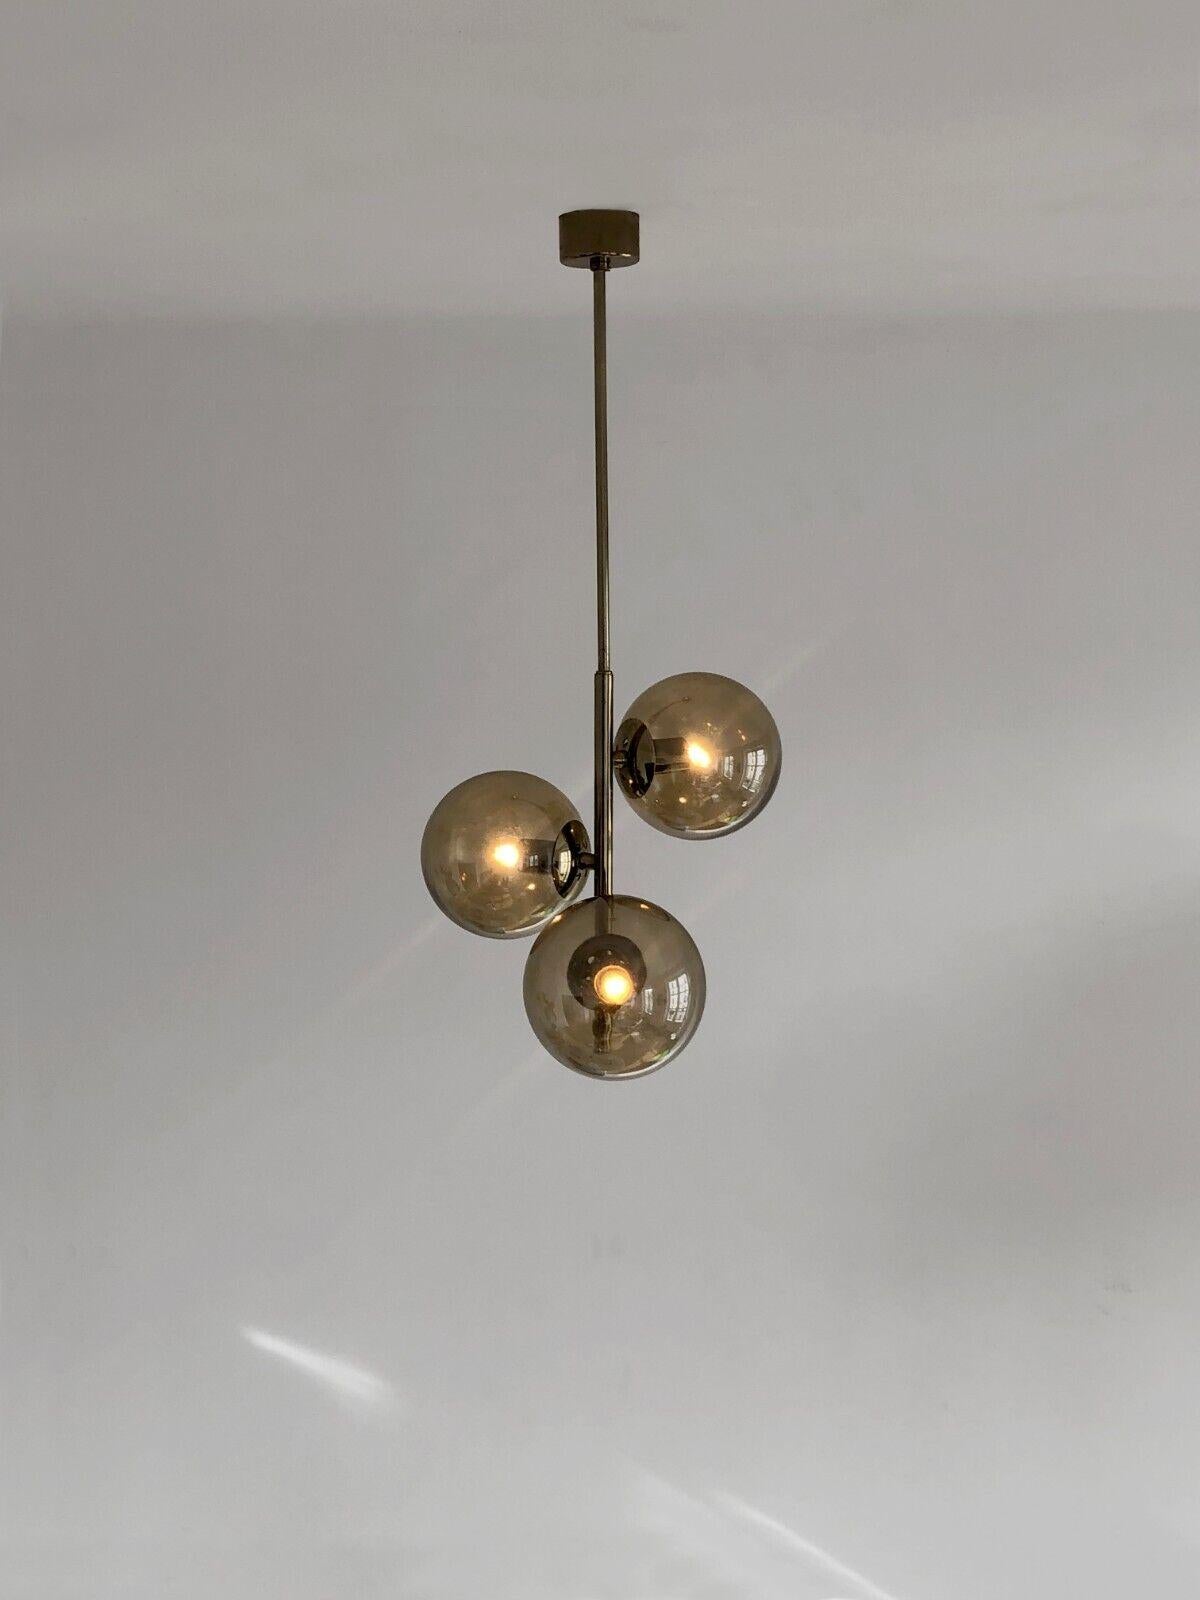 An elegant and rigorous 3-light pendant light, Post-Modernist, Seventies, Space-Age, tubular structure in 